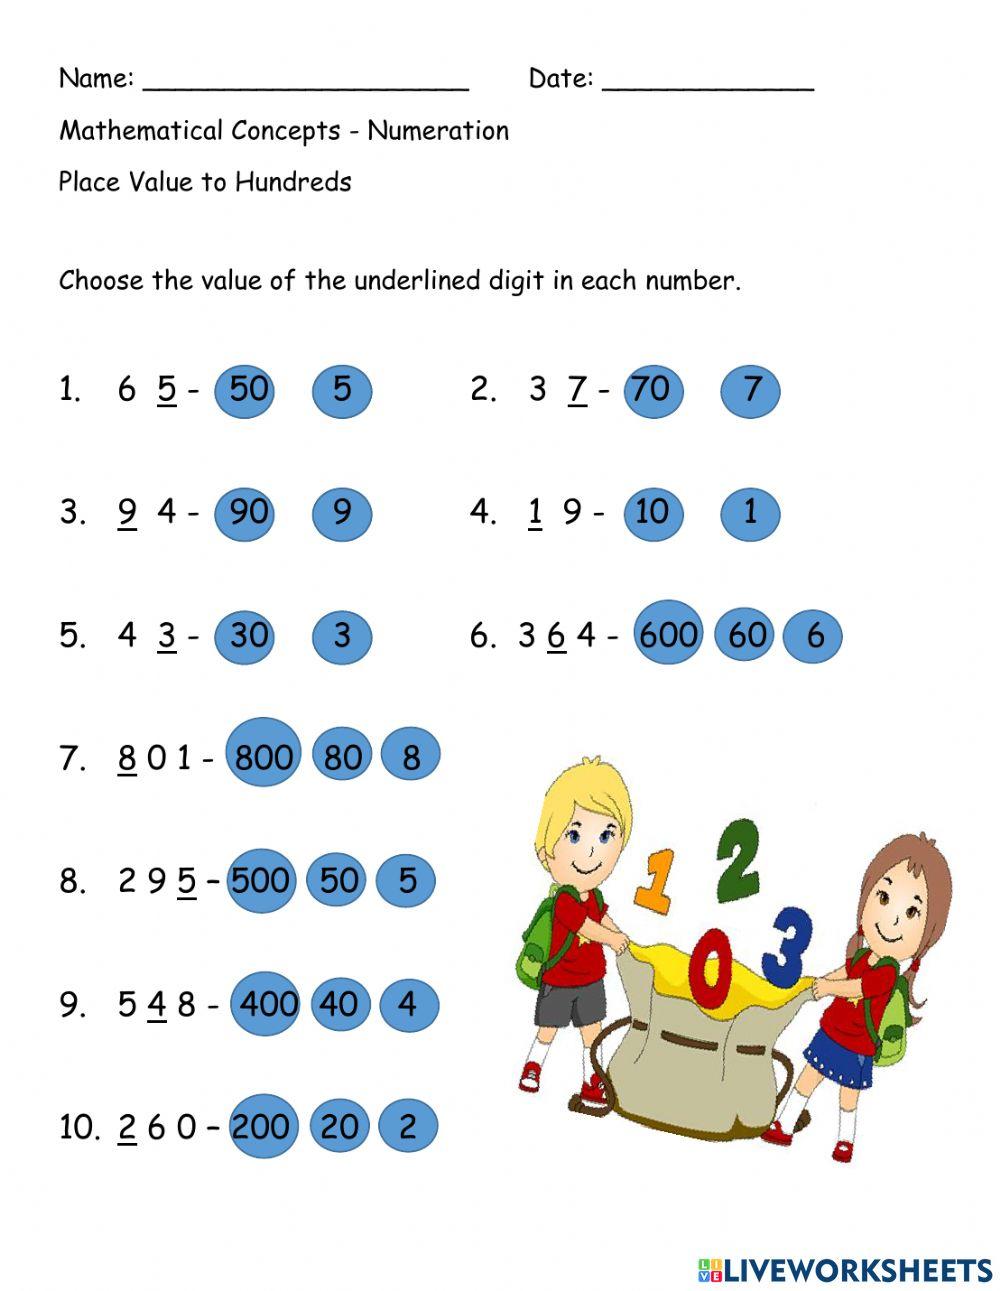 Understanding Place Value to Hundreds